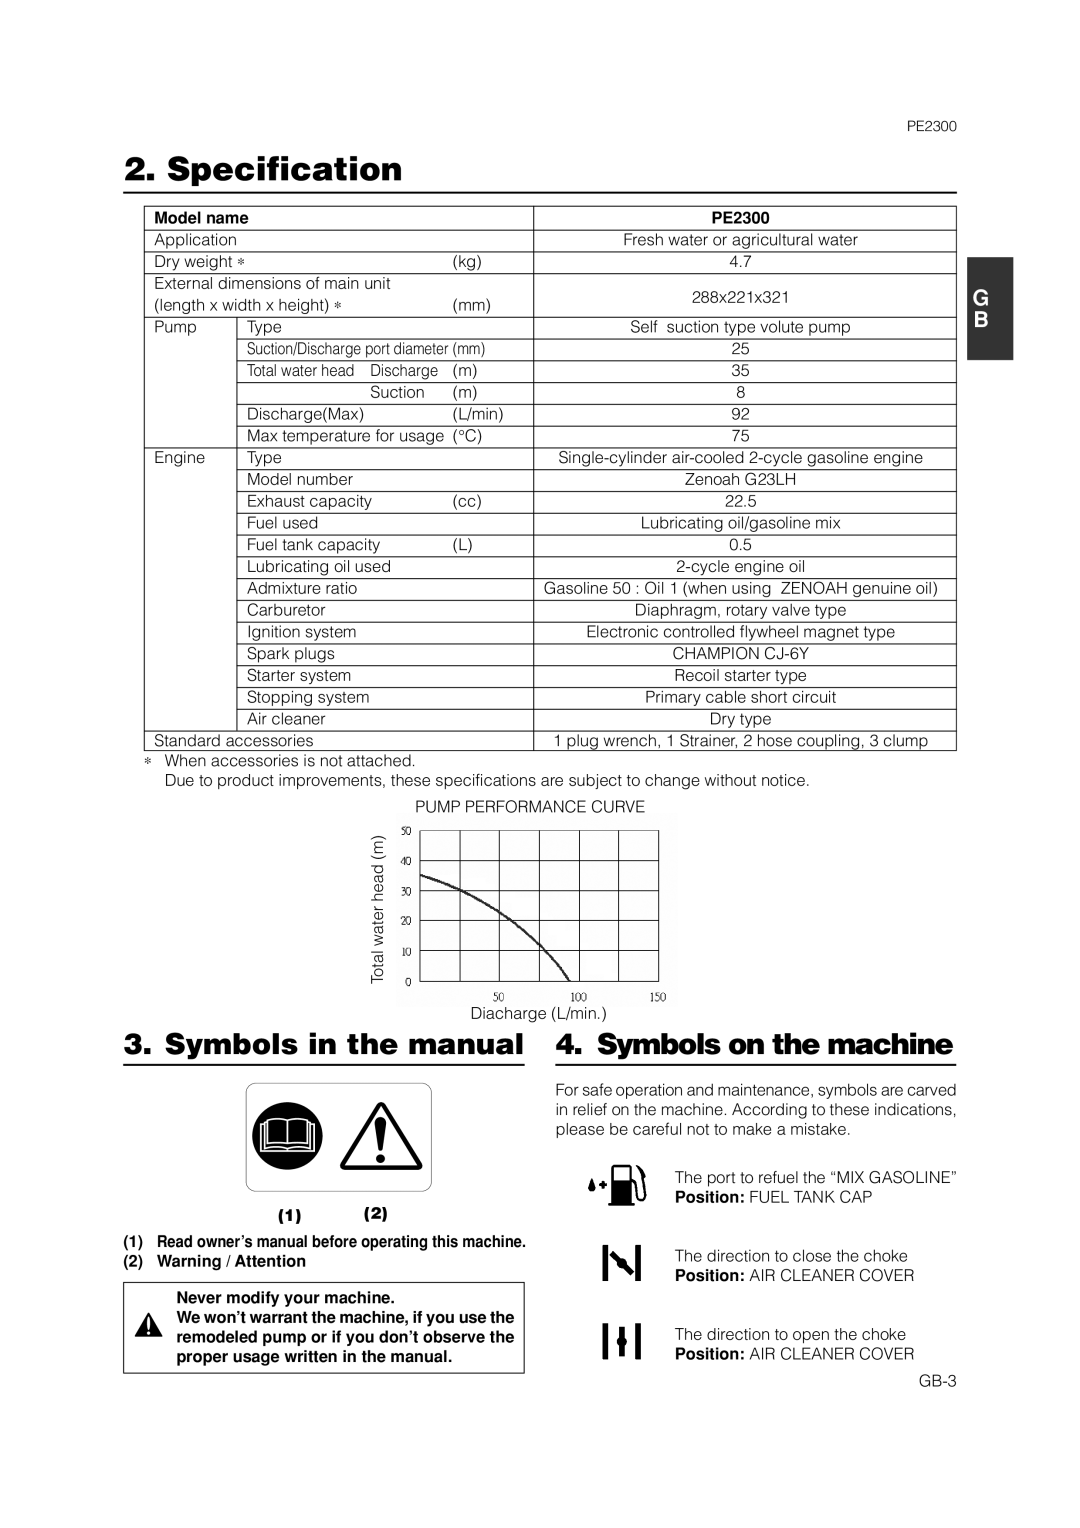 Zenoah PE2300 owner manual Specification, Model name, 2Warning / Attention Never modify your machine 